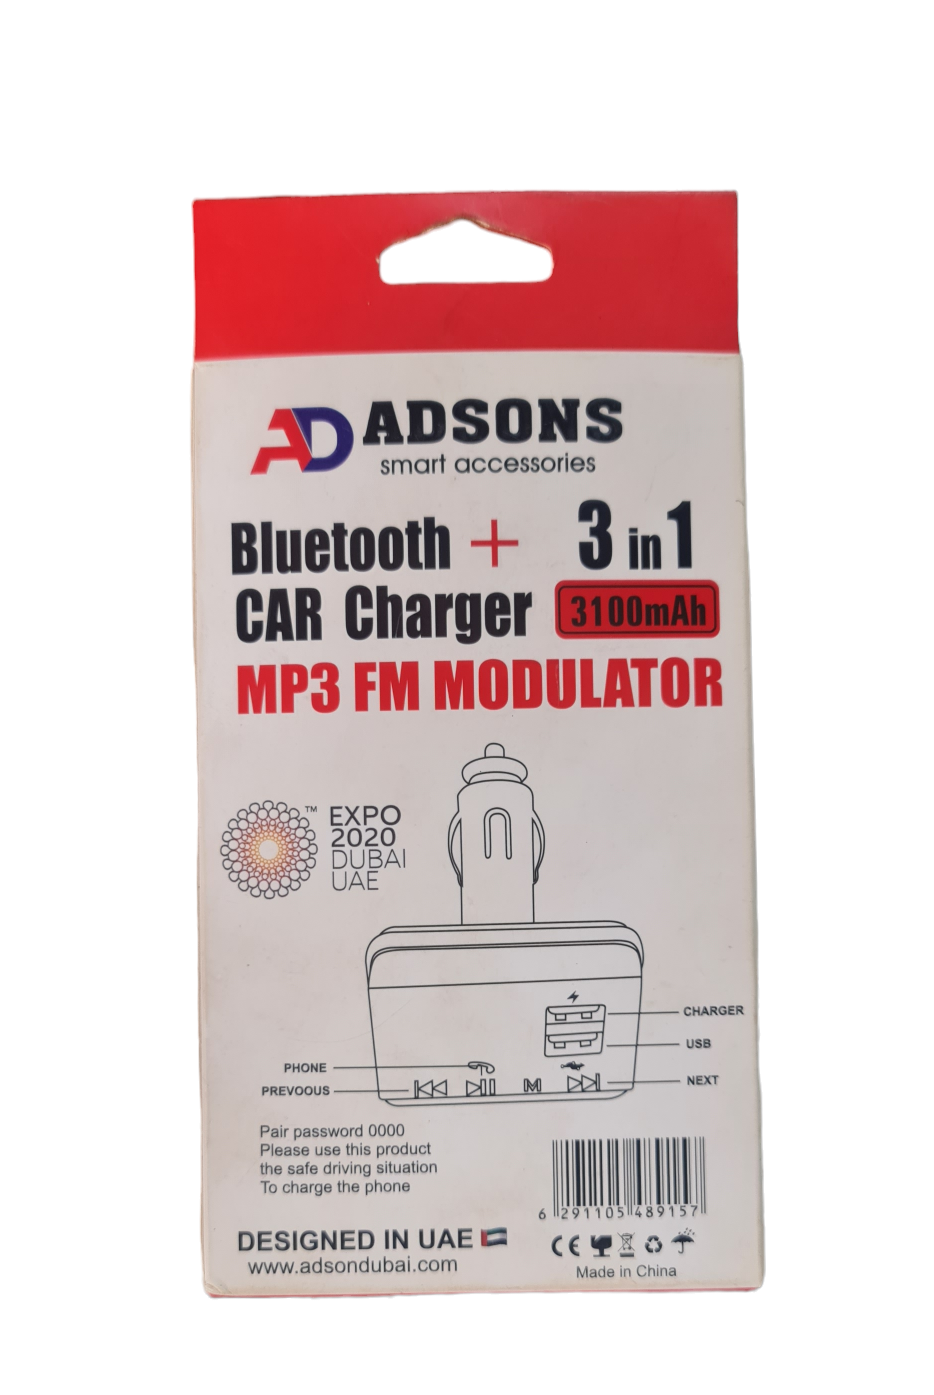 ADSONS bluetooth, fm modurator and car charger